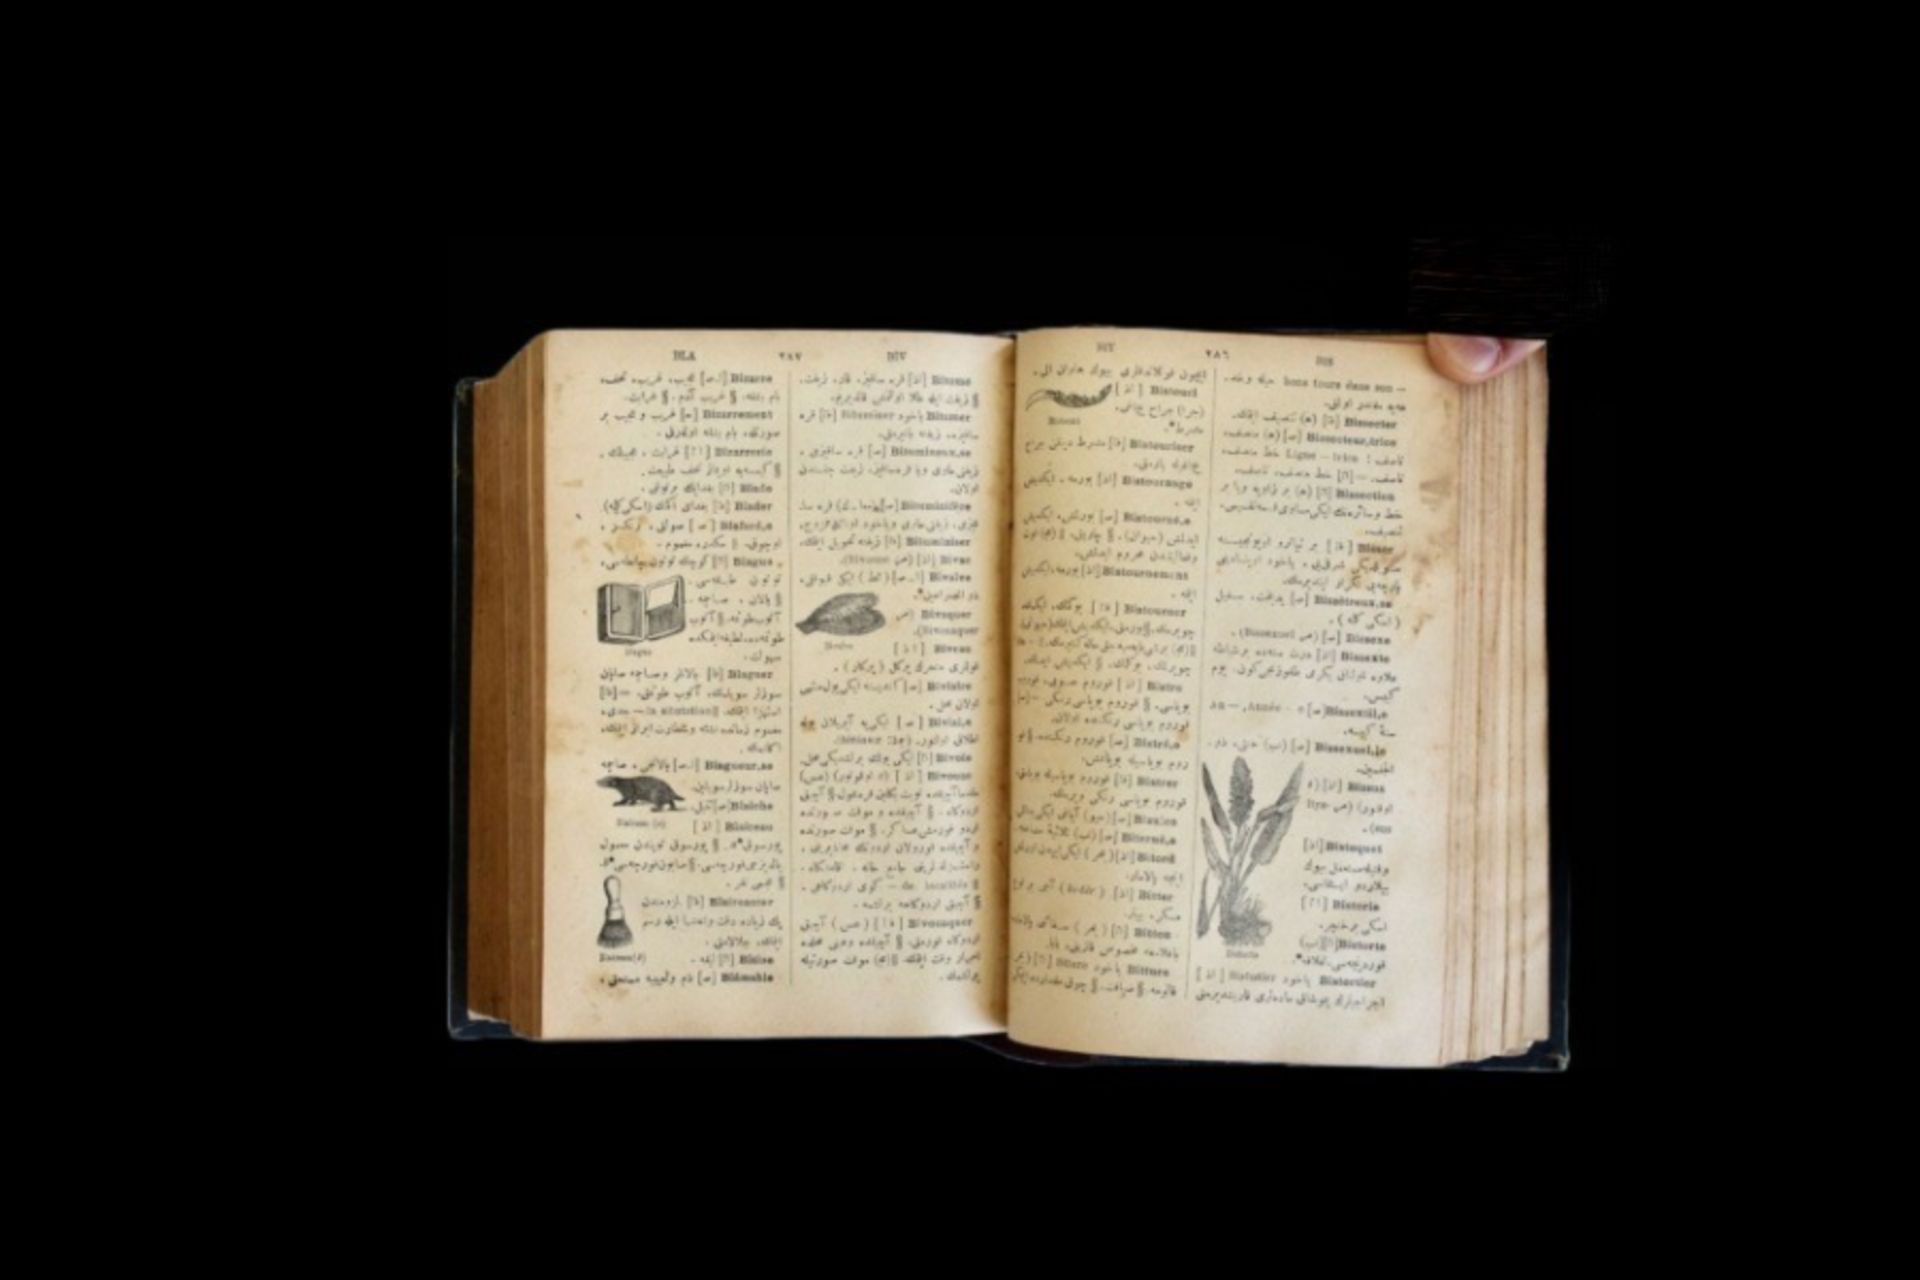 19th century French - Ottoman dictionary - Image 11 of 19